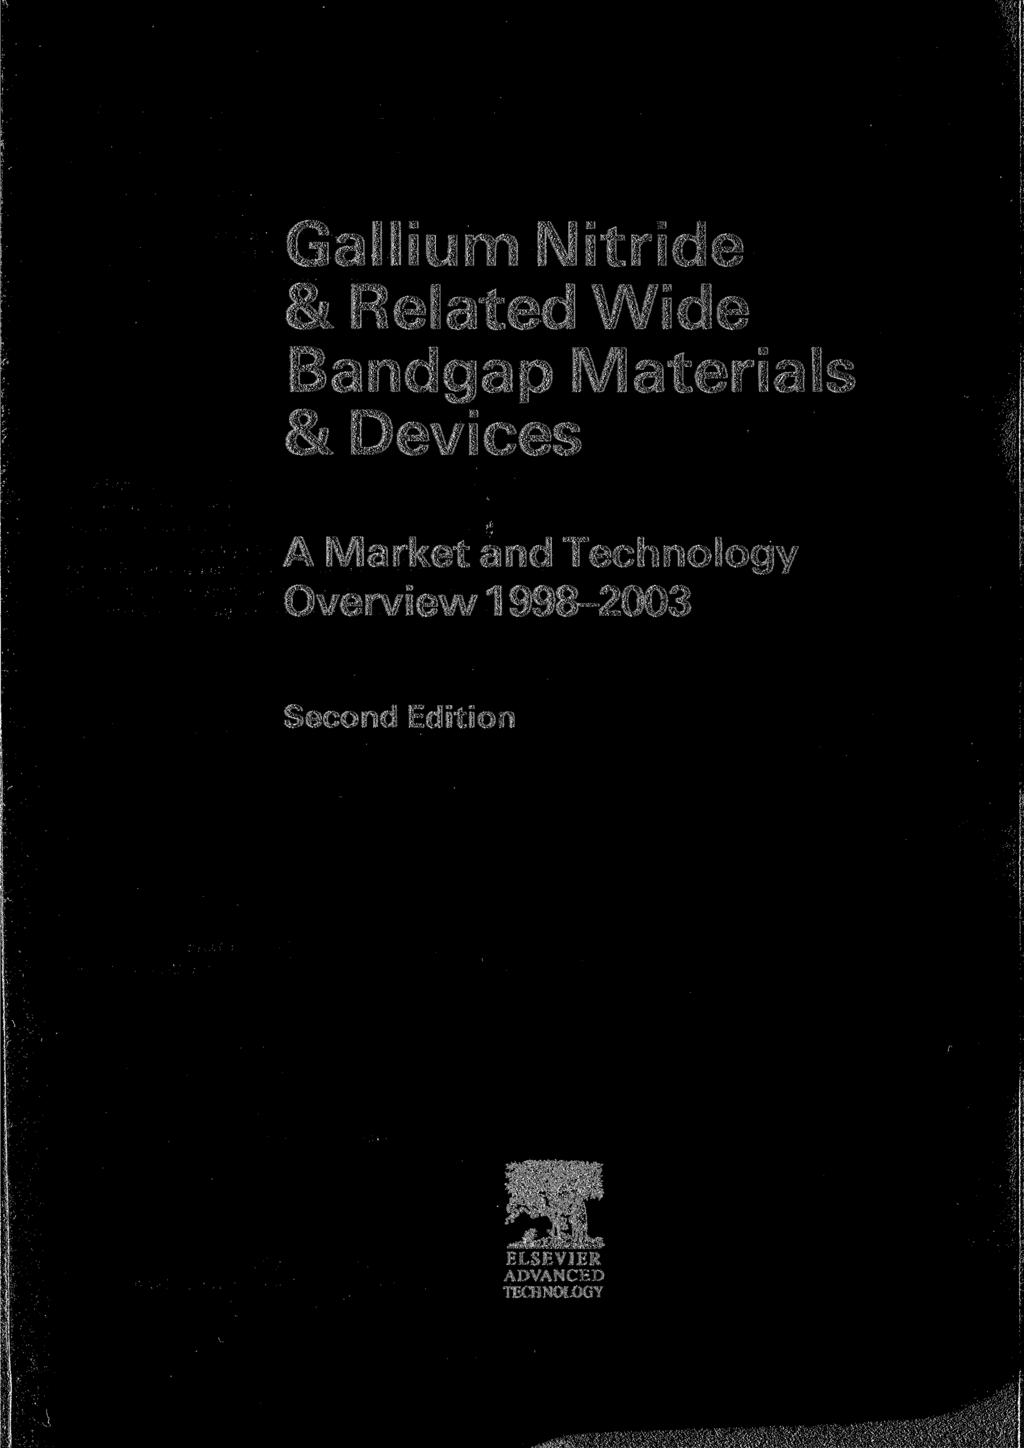 Gallium Nitride & Related Wide Bandgap Materials & Devices A Market and